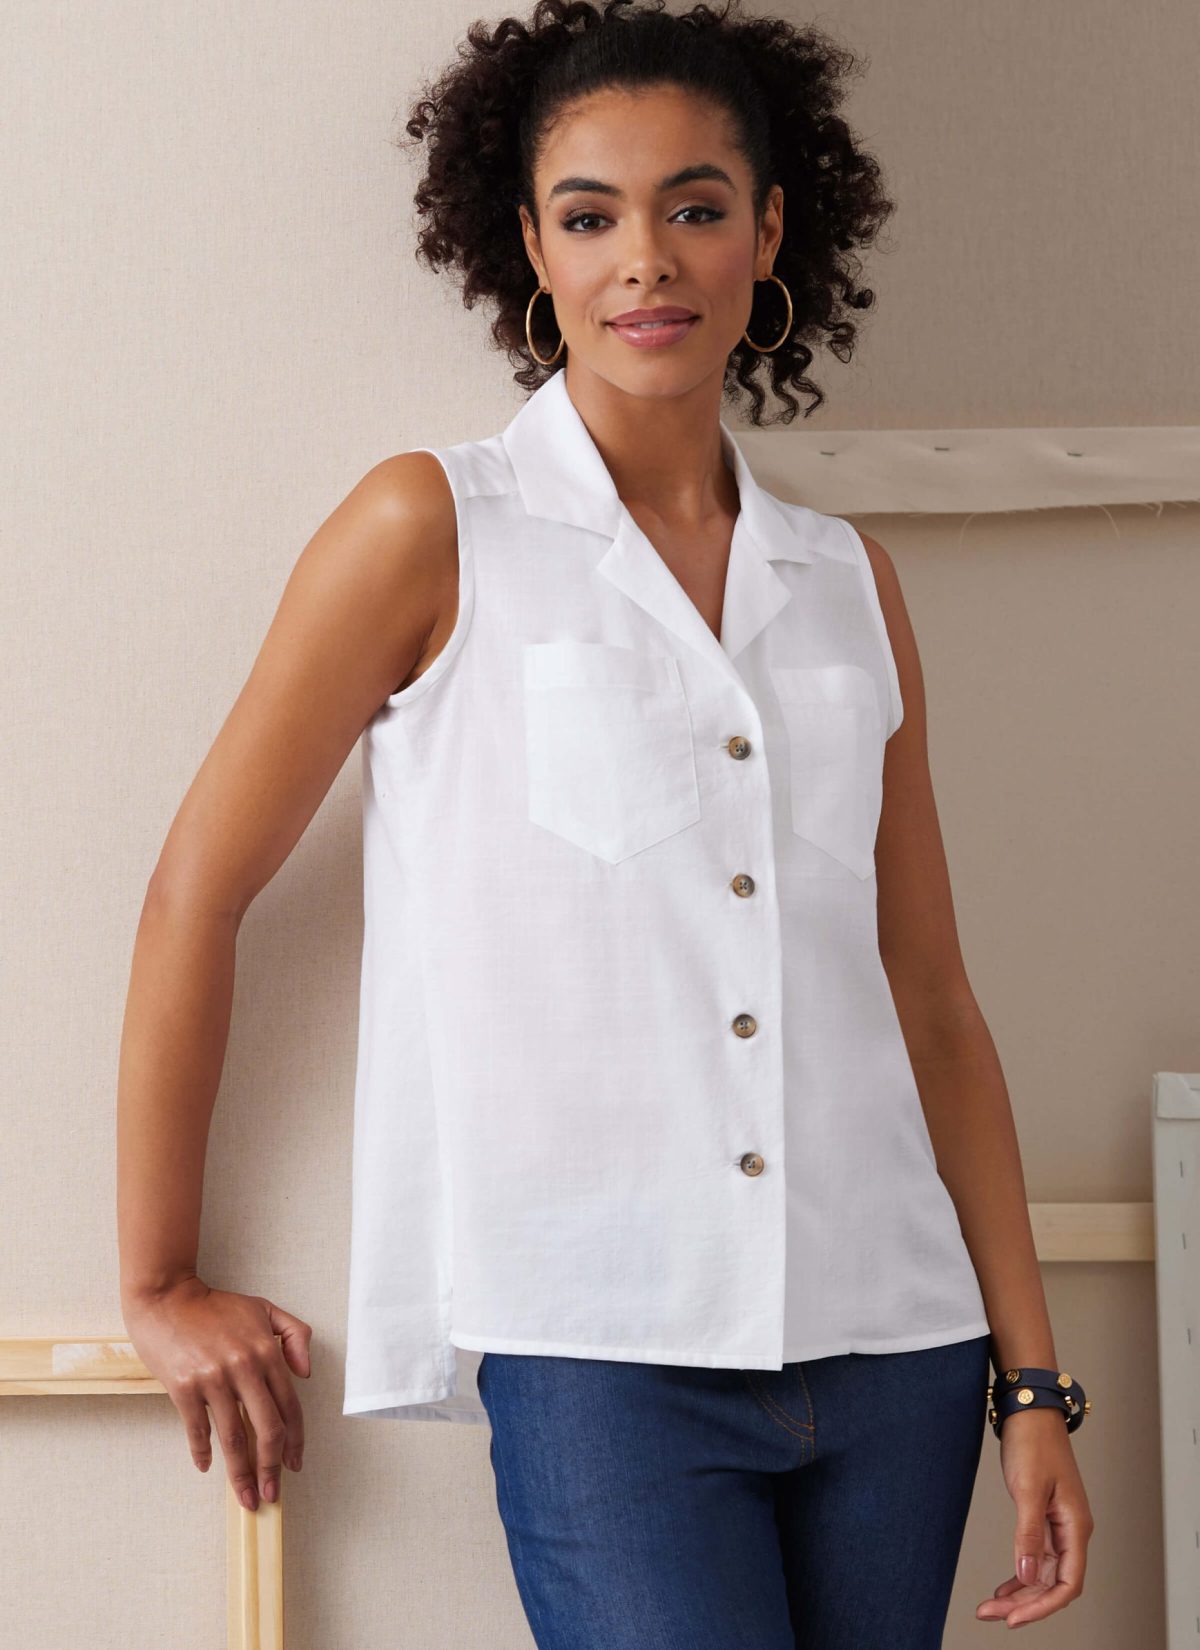 Butterick Sewing Pattern B6924 Misses' Shirts By Palmer/Pletsch